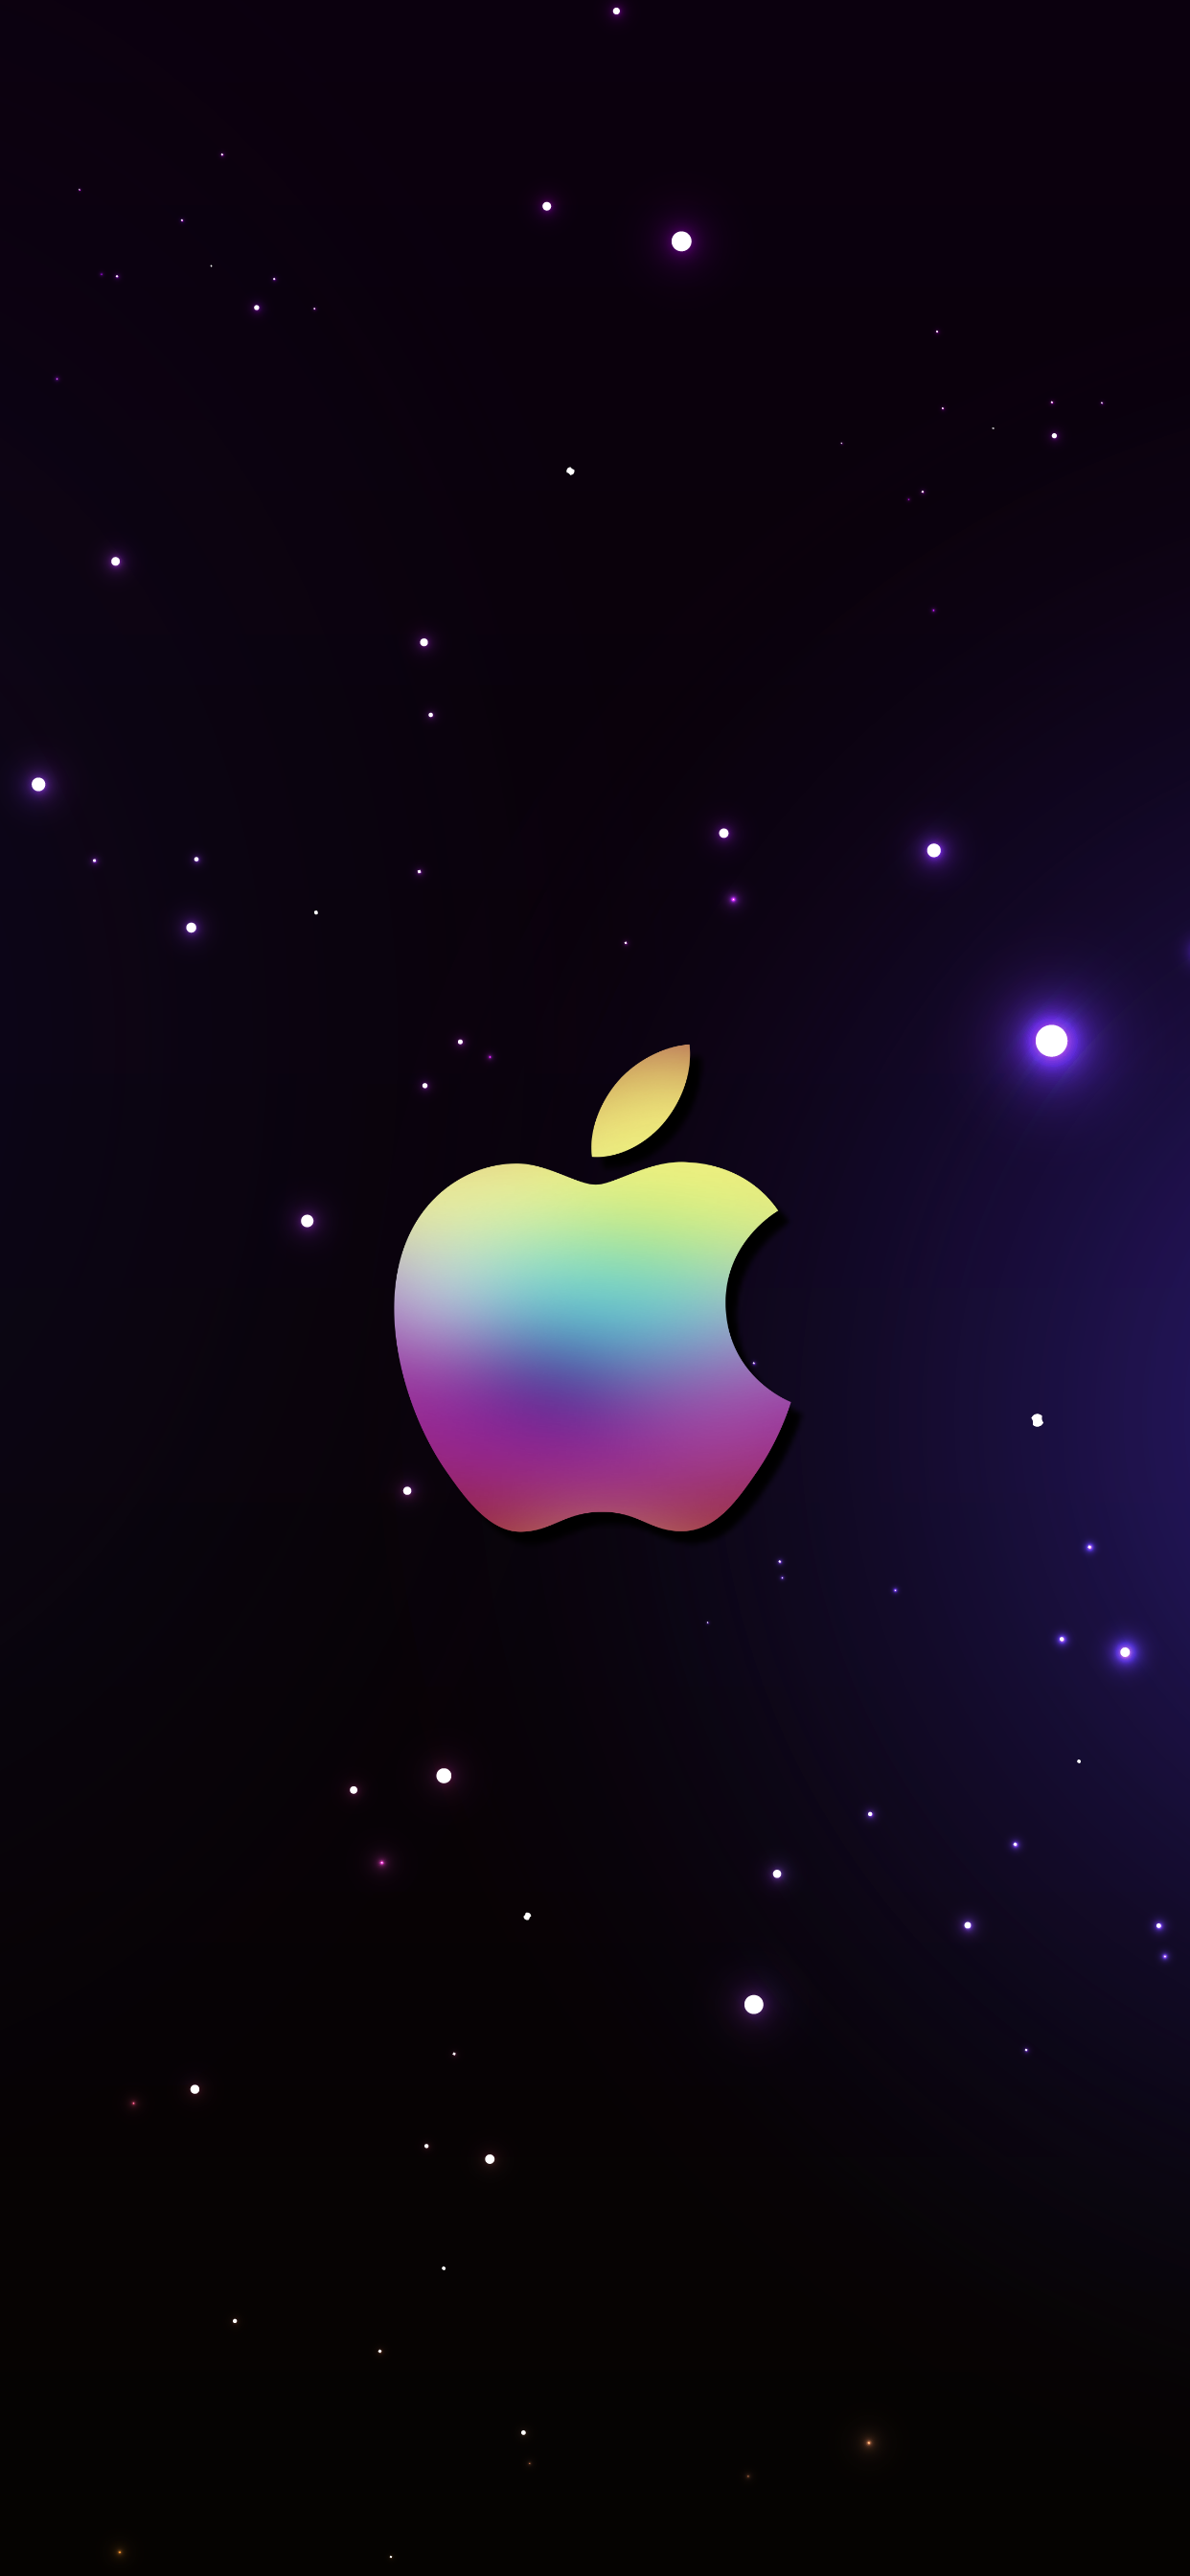 apple iphone wallpapers logo in a galaxy background hd